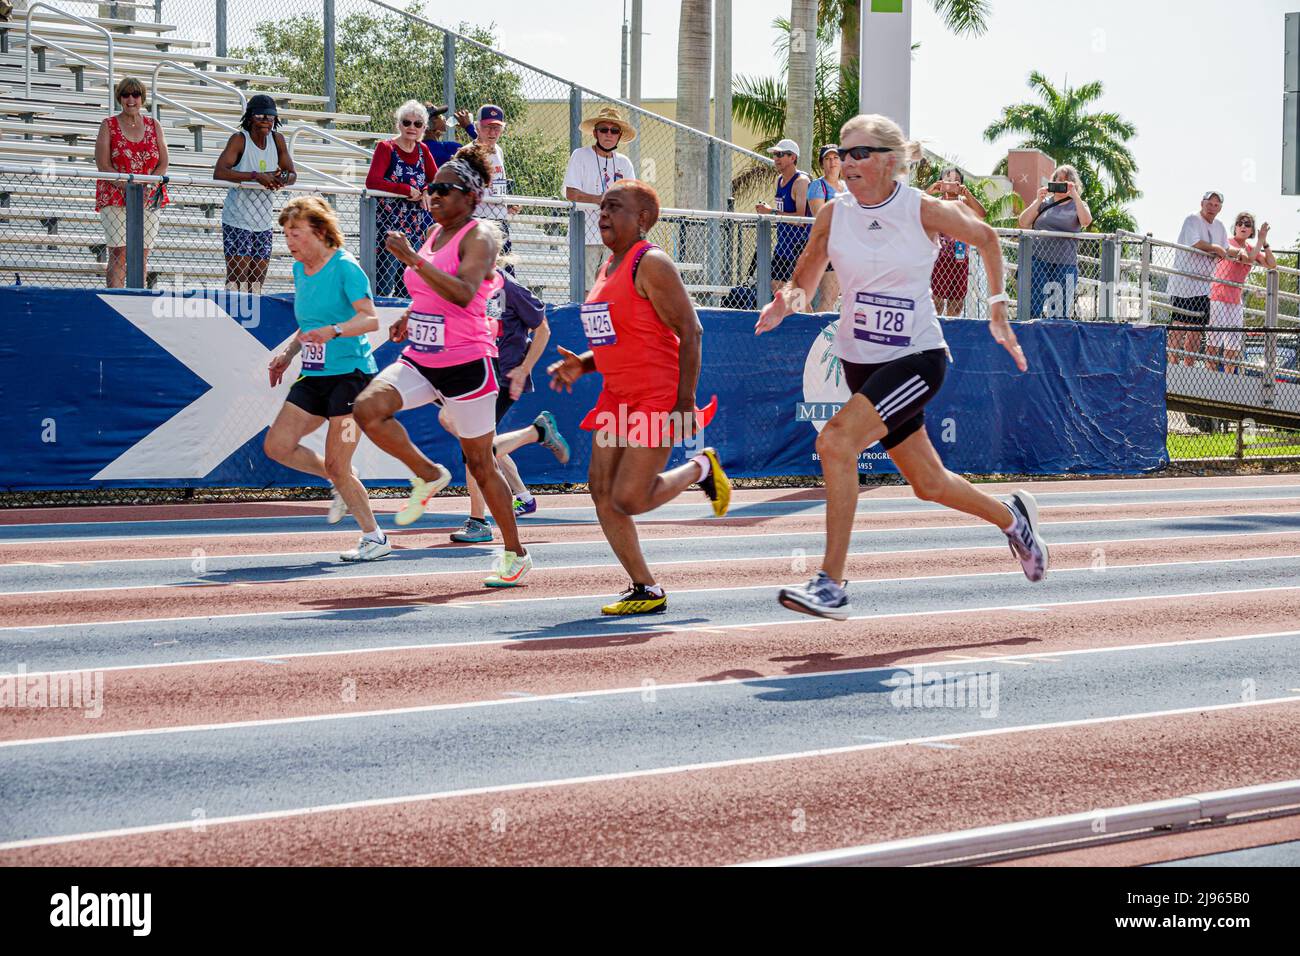 Fort Ft. Lauderdale Florida,Ansin Sports Complex Track & Field National Senior Games,seniors Black female women runners running competitors competing Stock Photo